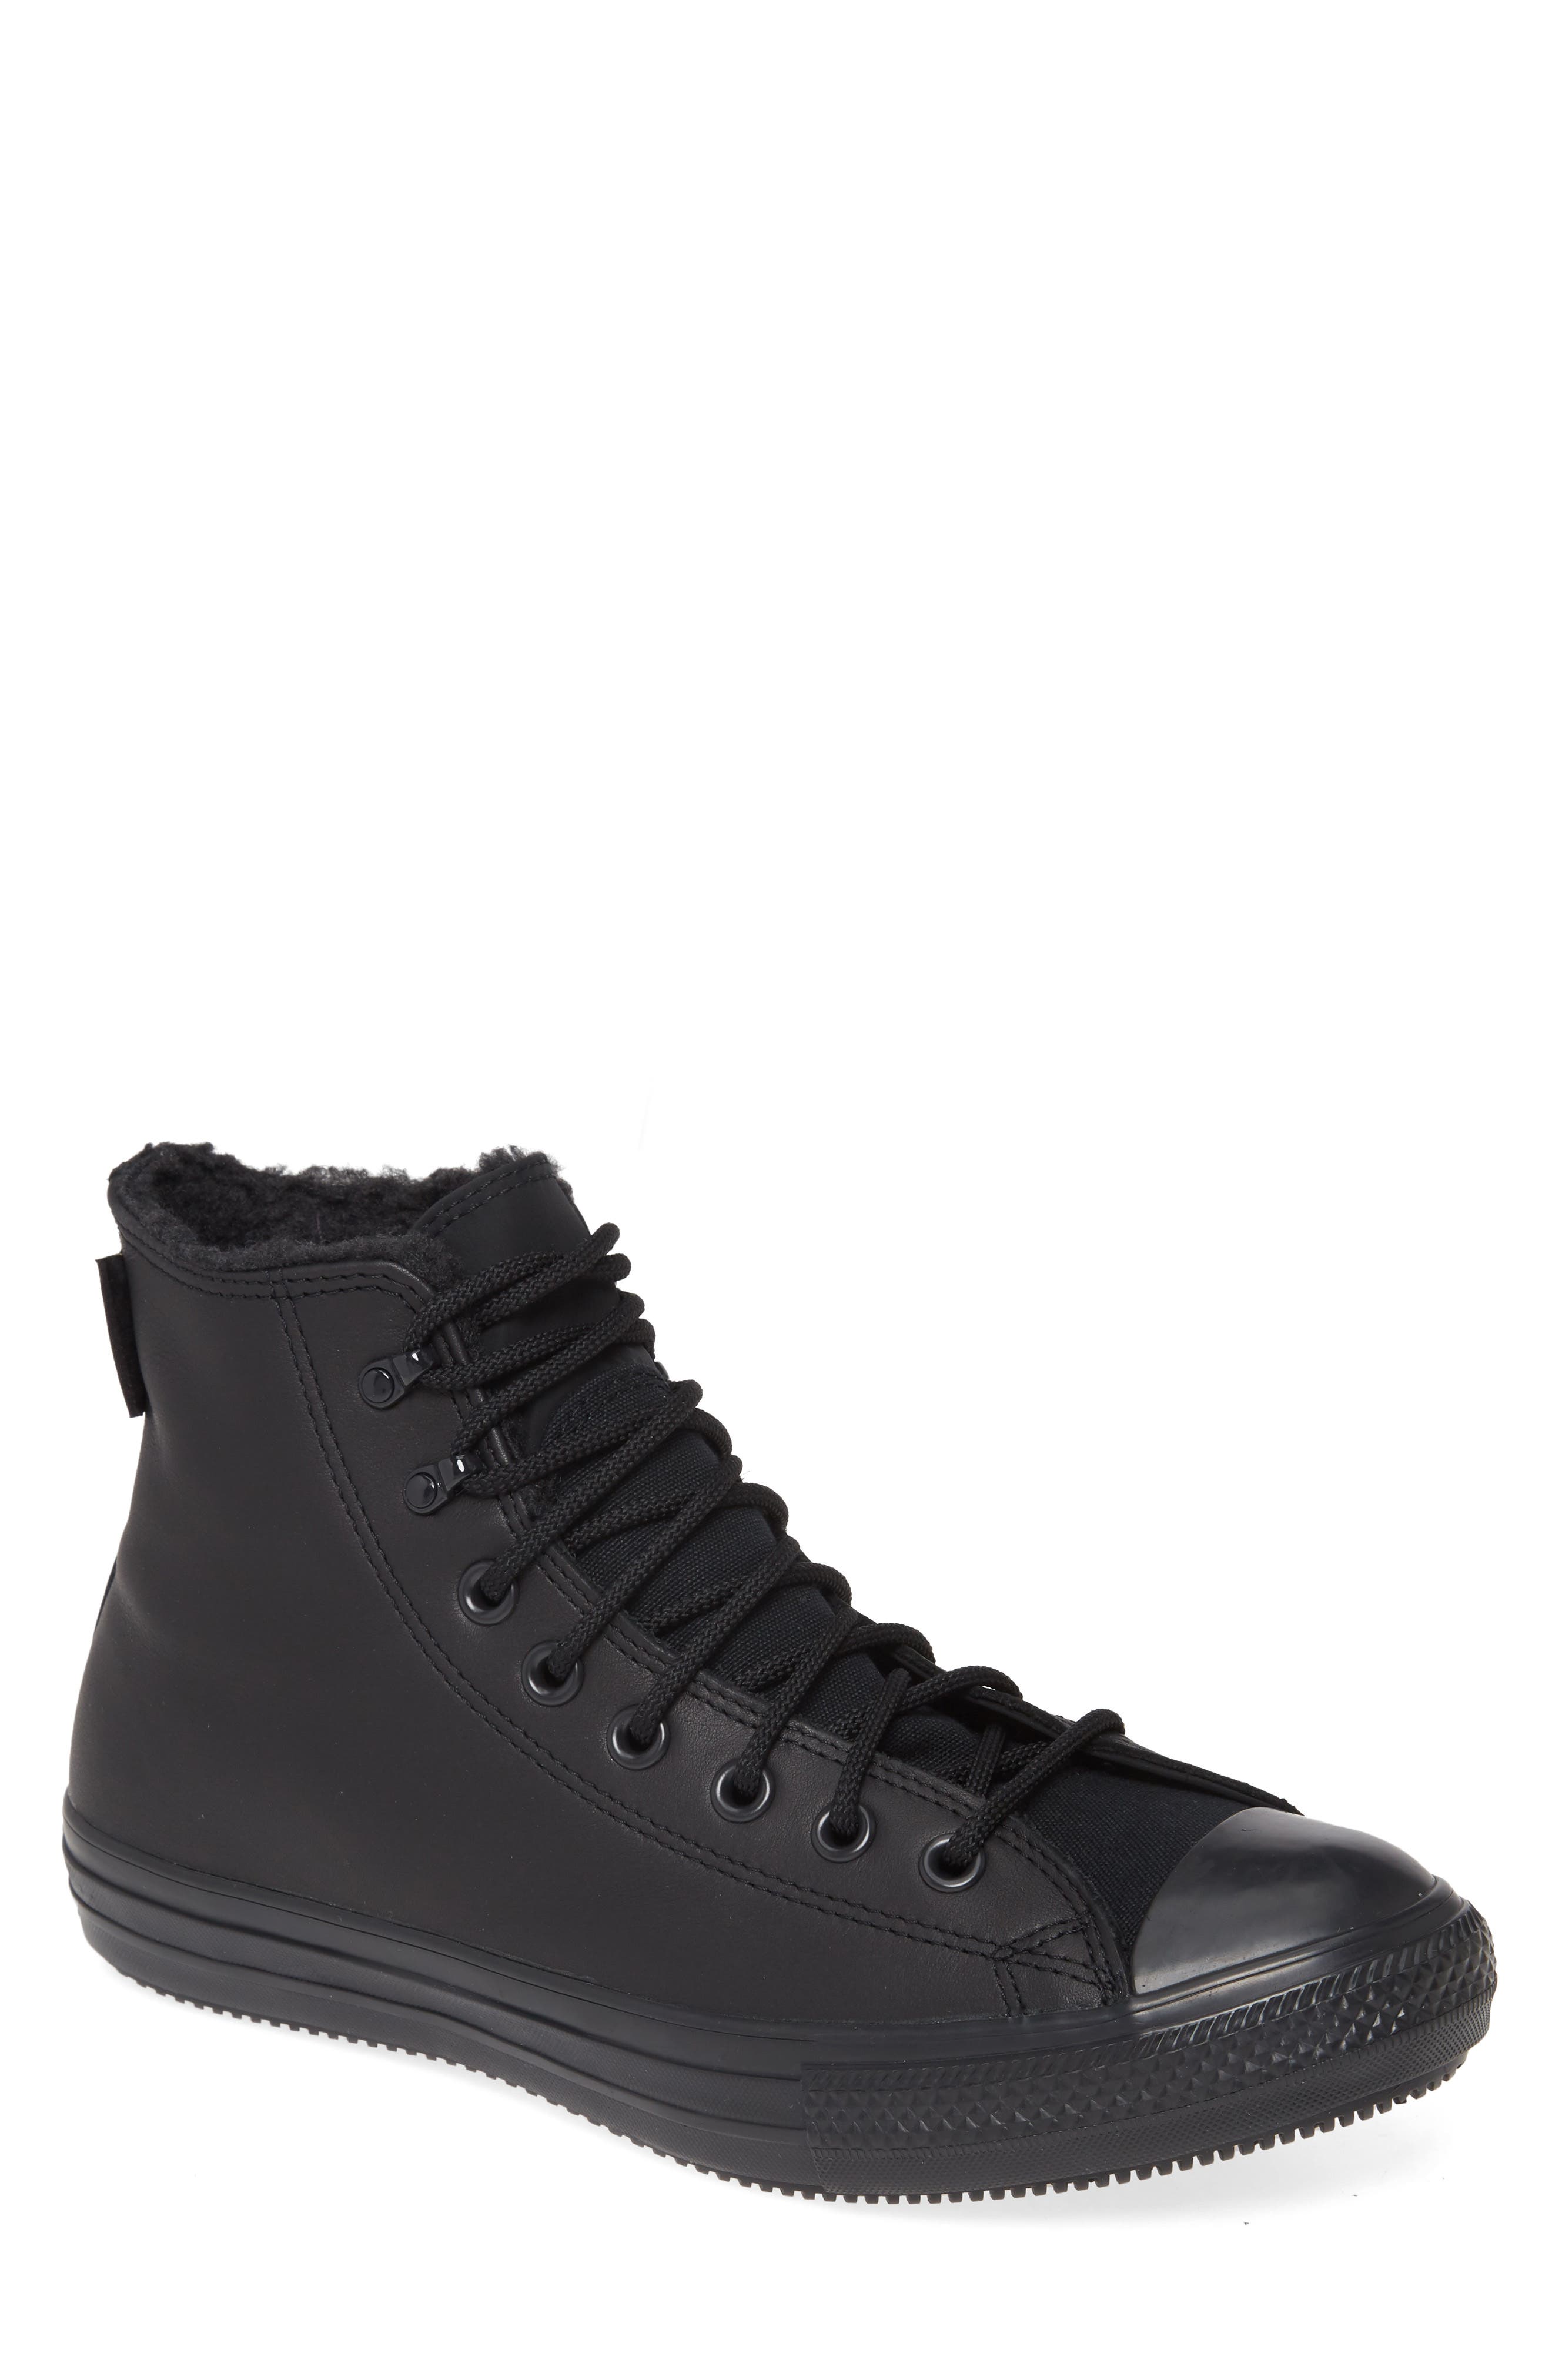 converse work boots canada